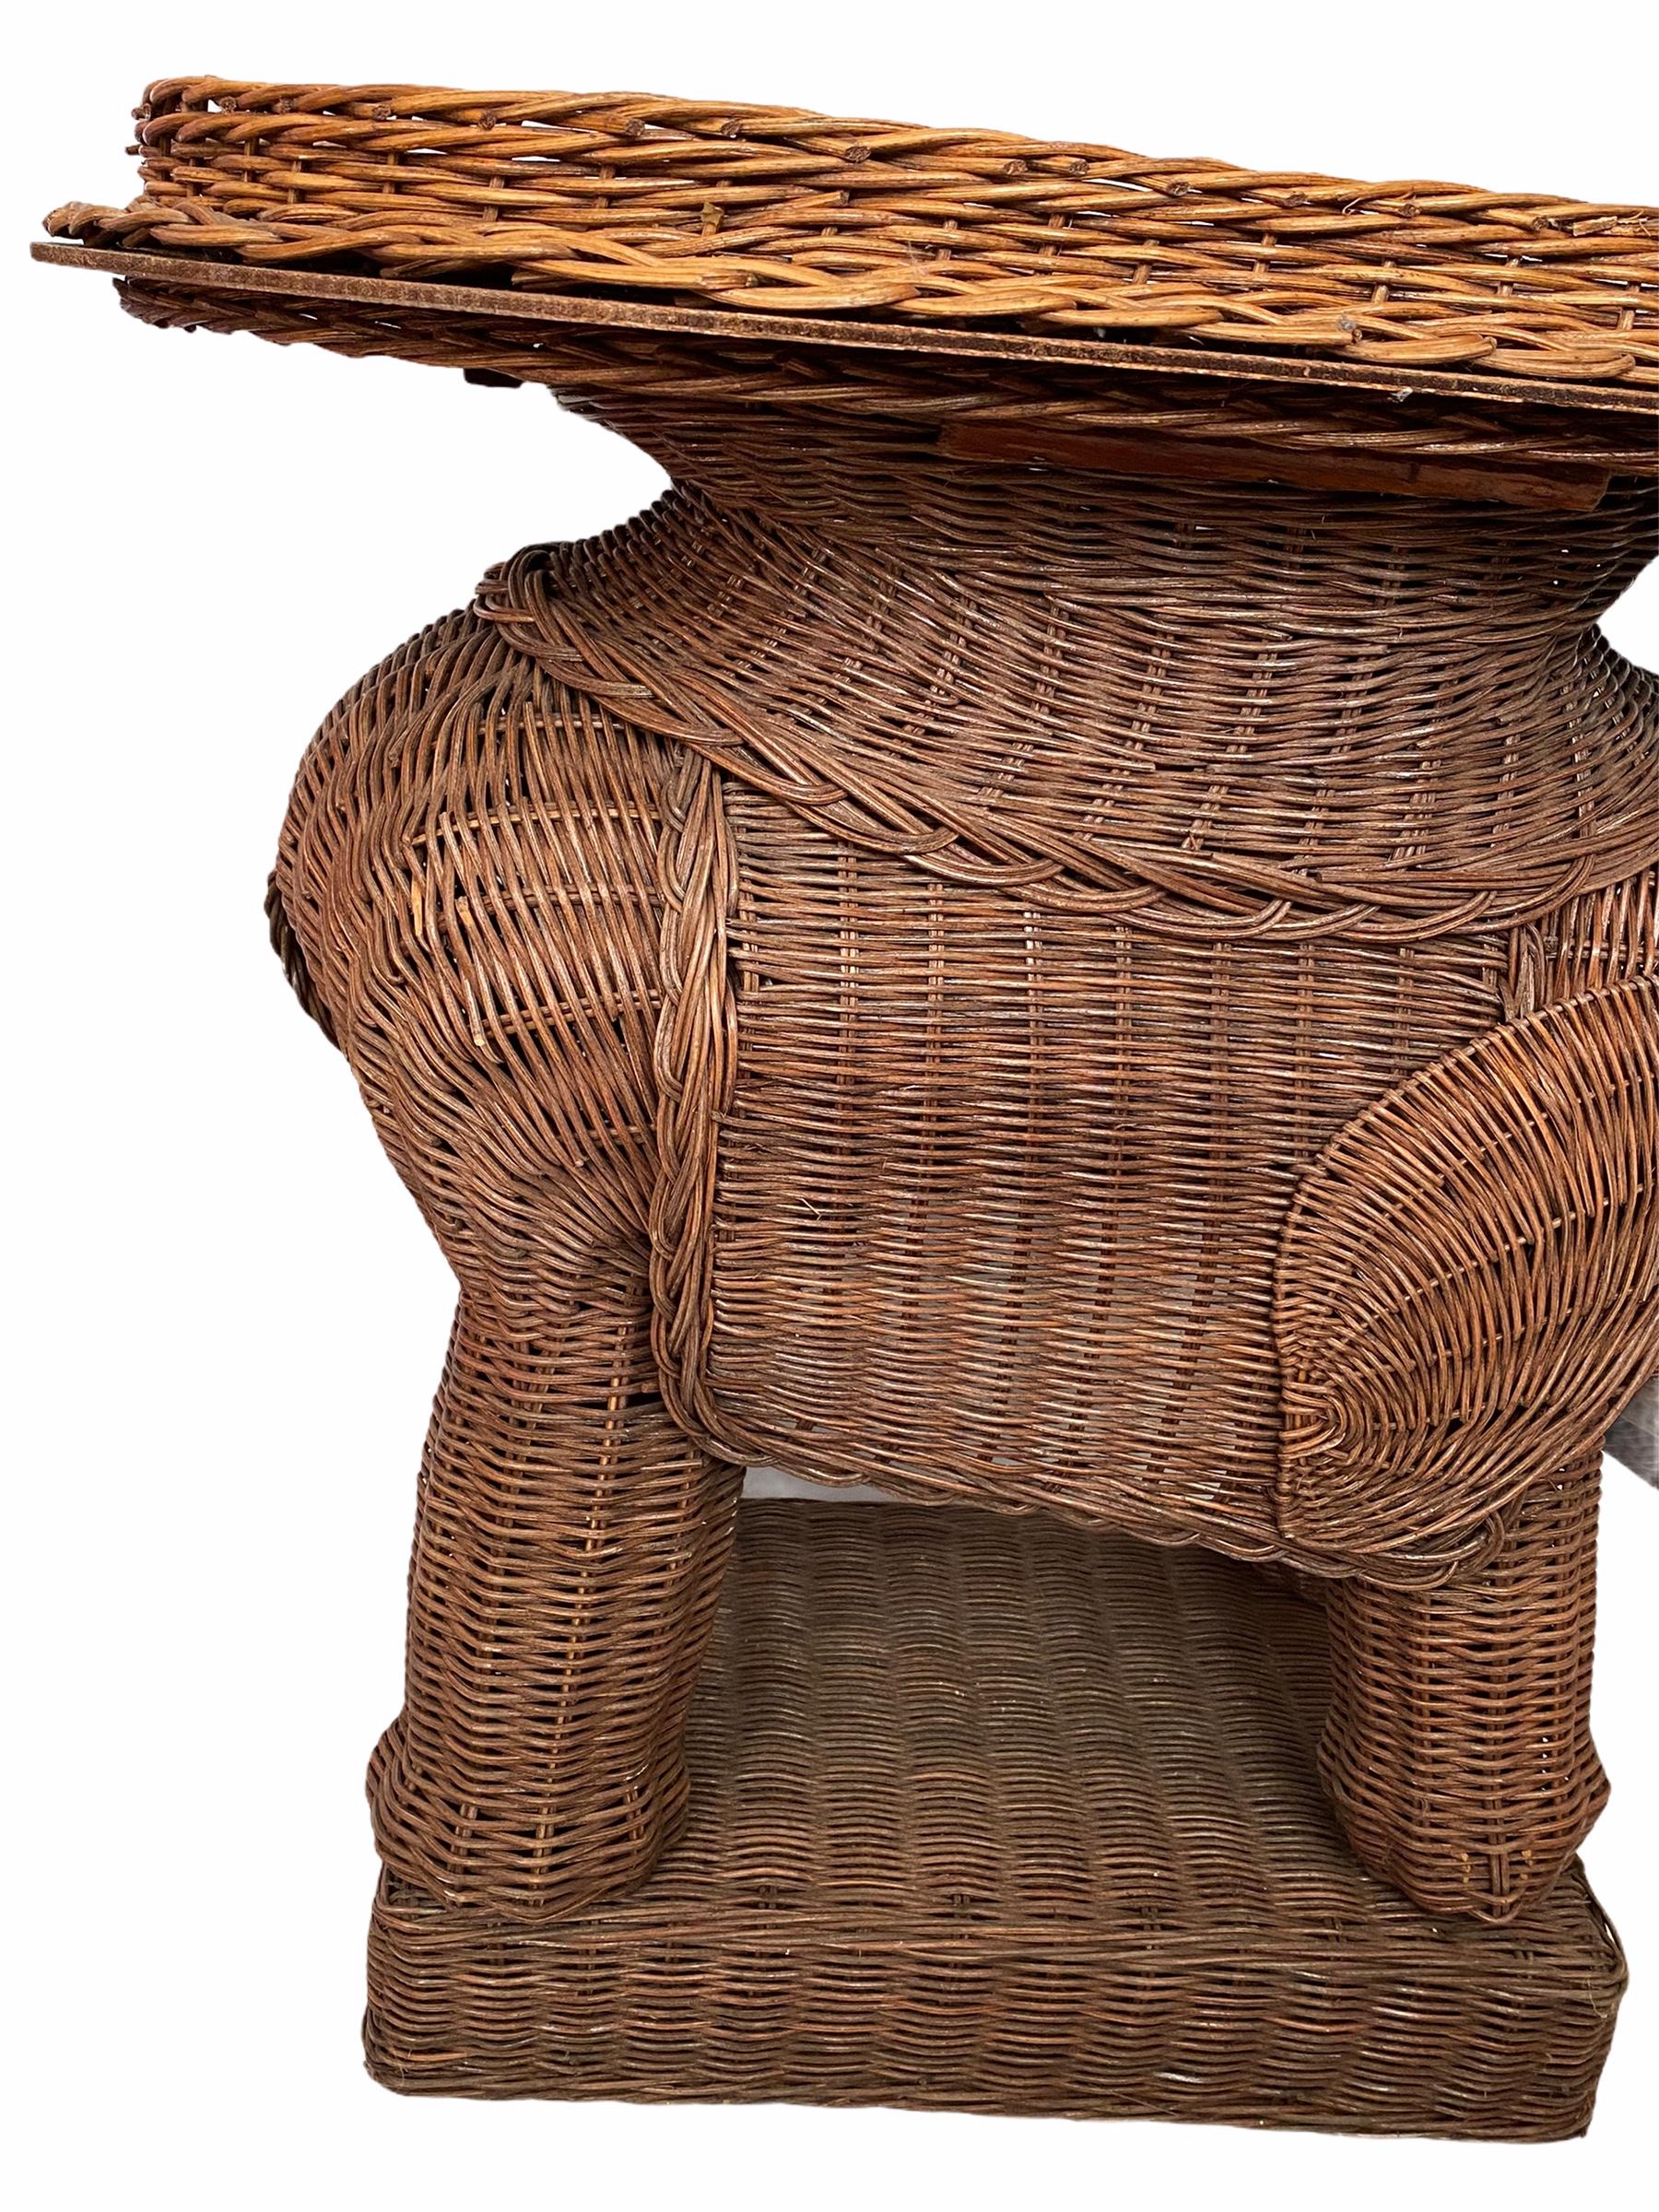 Hollywood Regency Stunning Rattan Wicker Elephant Side Table with Tray, France, 1960s